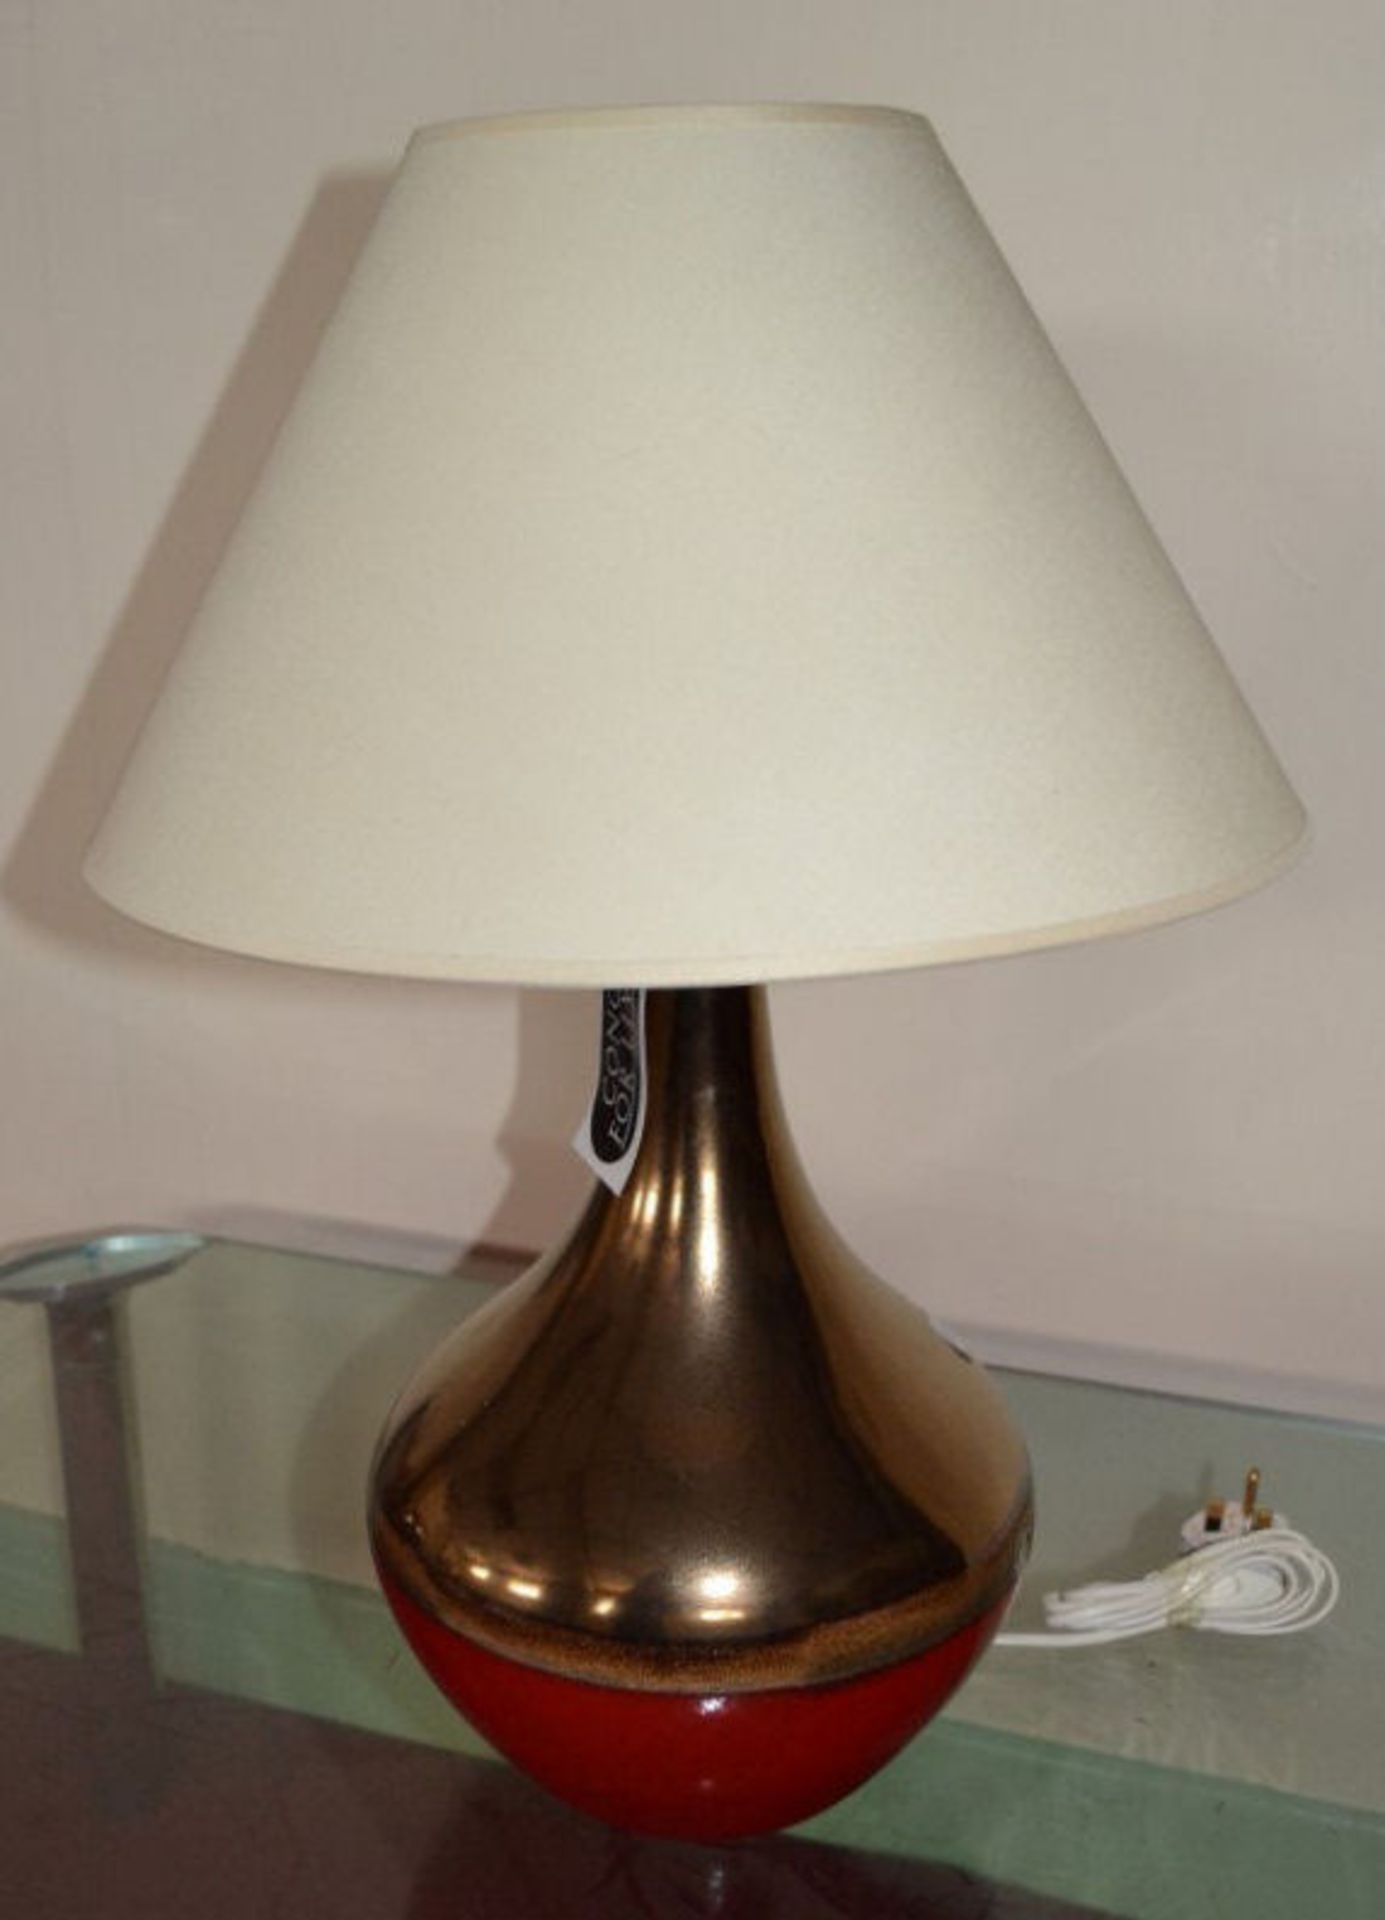 1 x Red/Brass Colour Lamp. Height 58.5cm To Top Of Cream Shade. Lampshade Diameter 40.5cm. - CL108 - Image 2 of 3